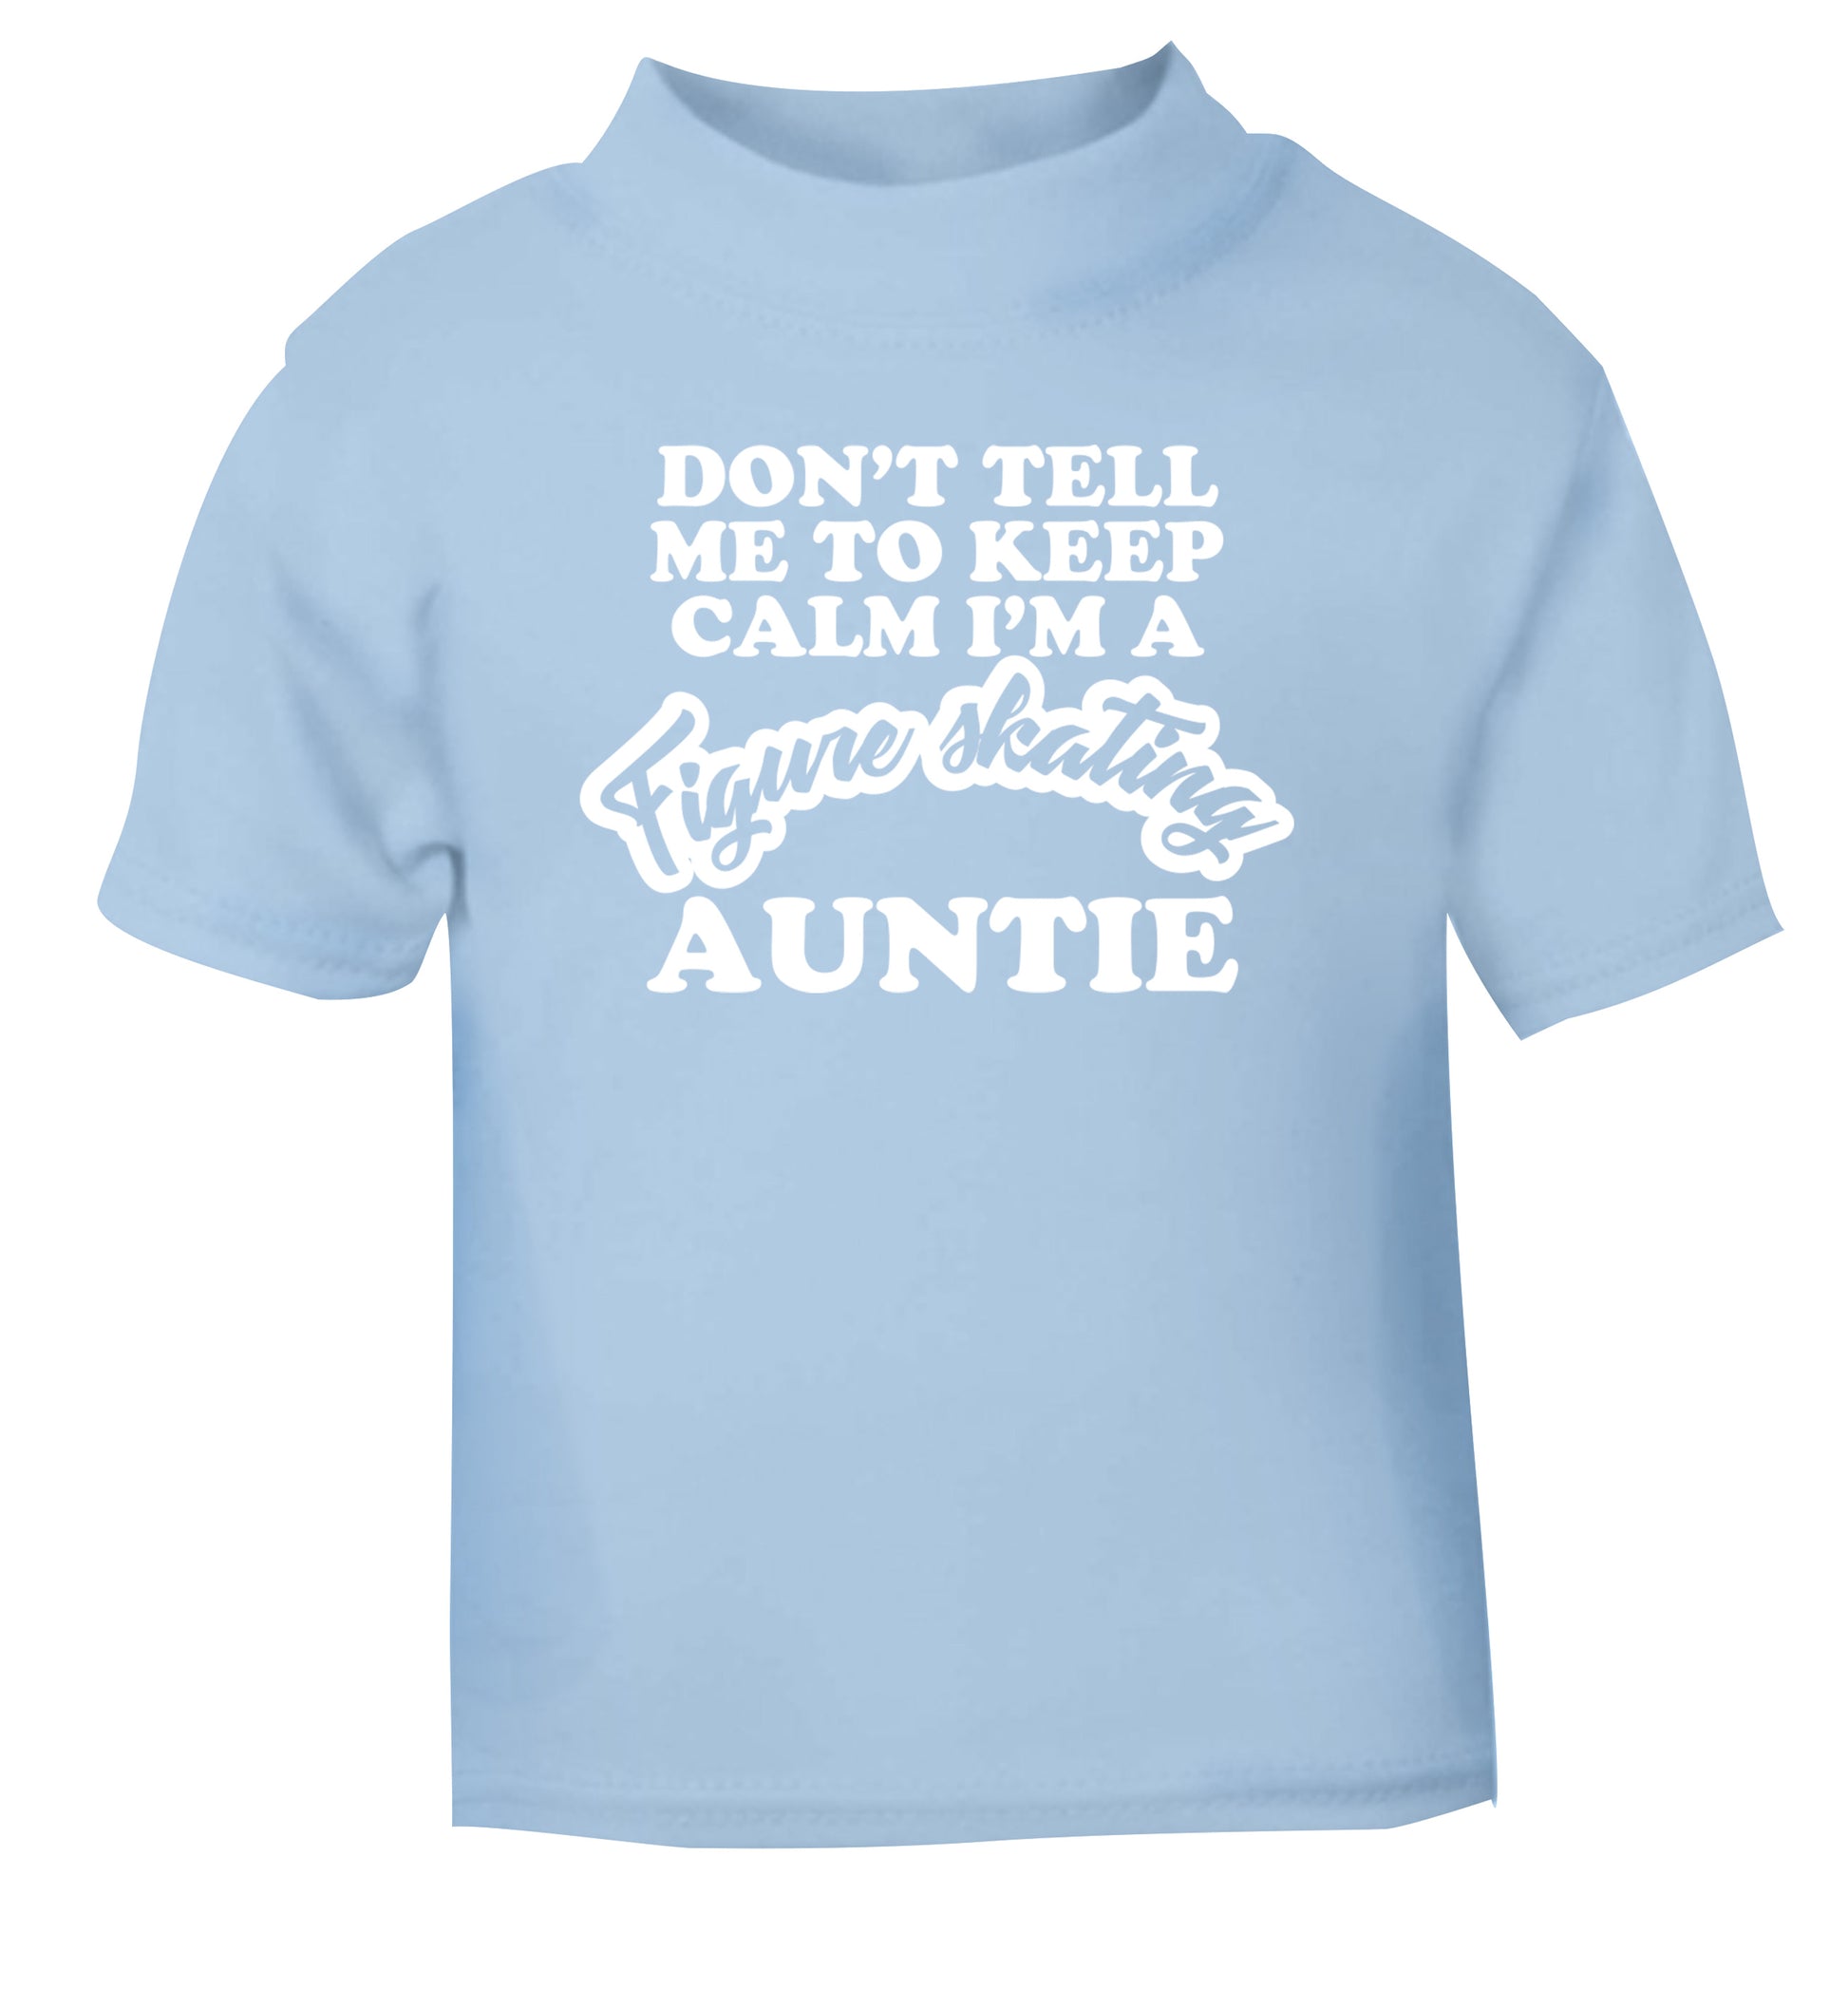 Don't tell me to keep calm I'm a figure skating auntie light blue Baby Toddler Tshirt 2 Years